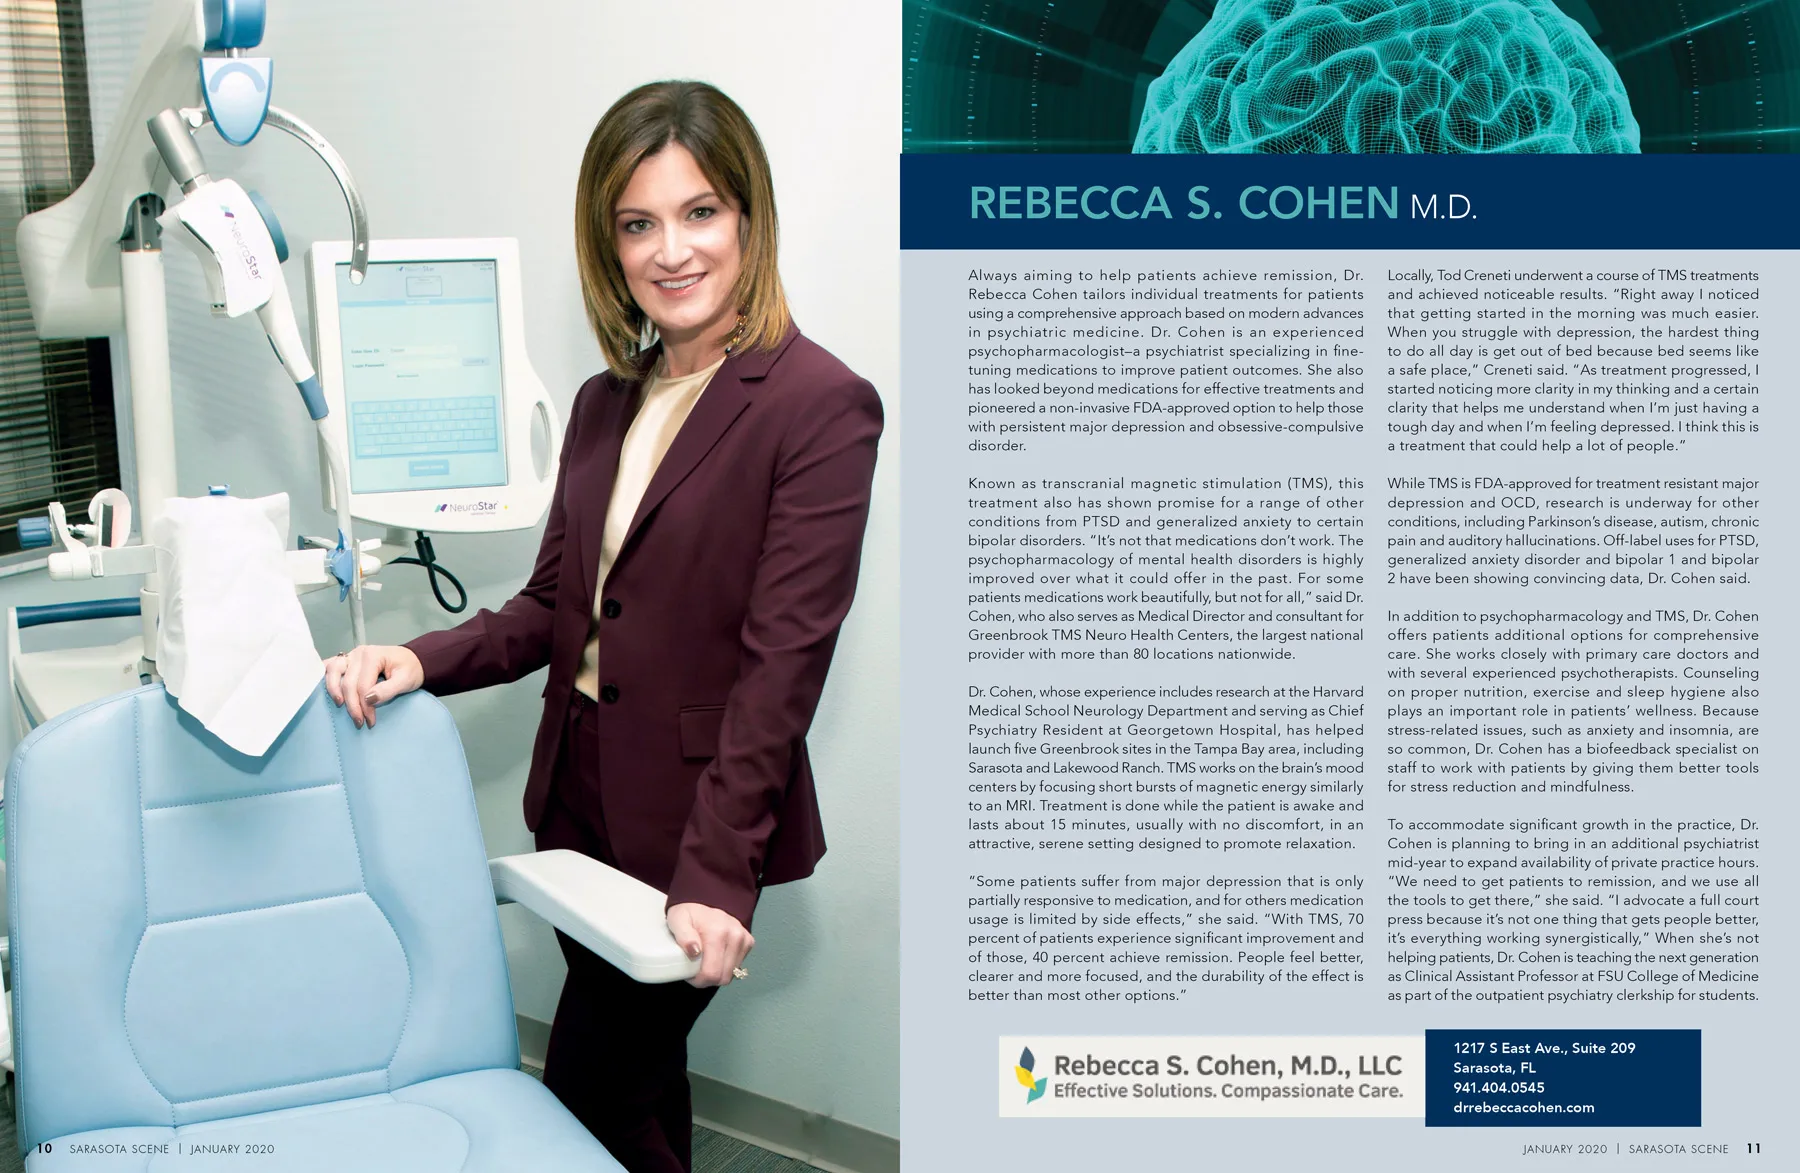 Dr. Cohen featured in Scene Magazine January 2020